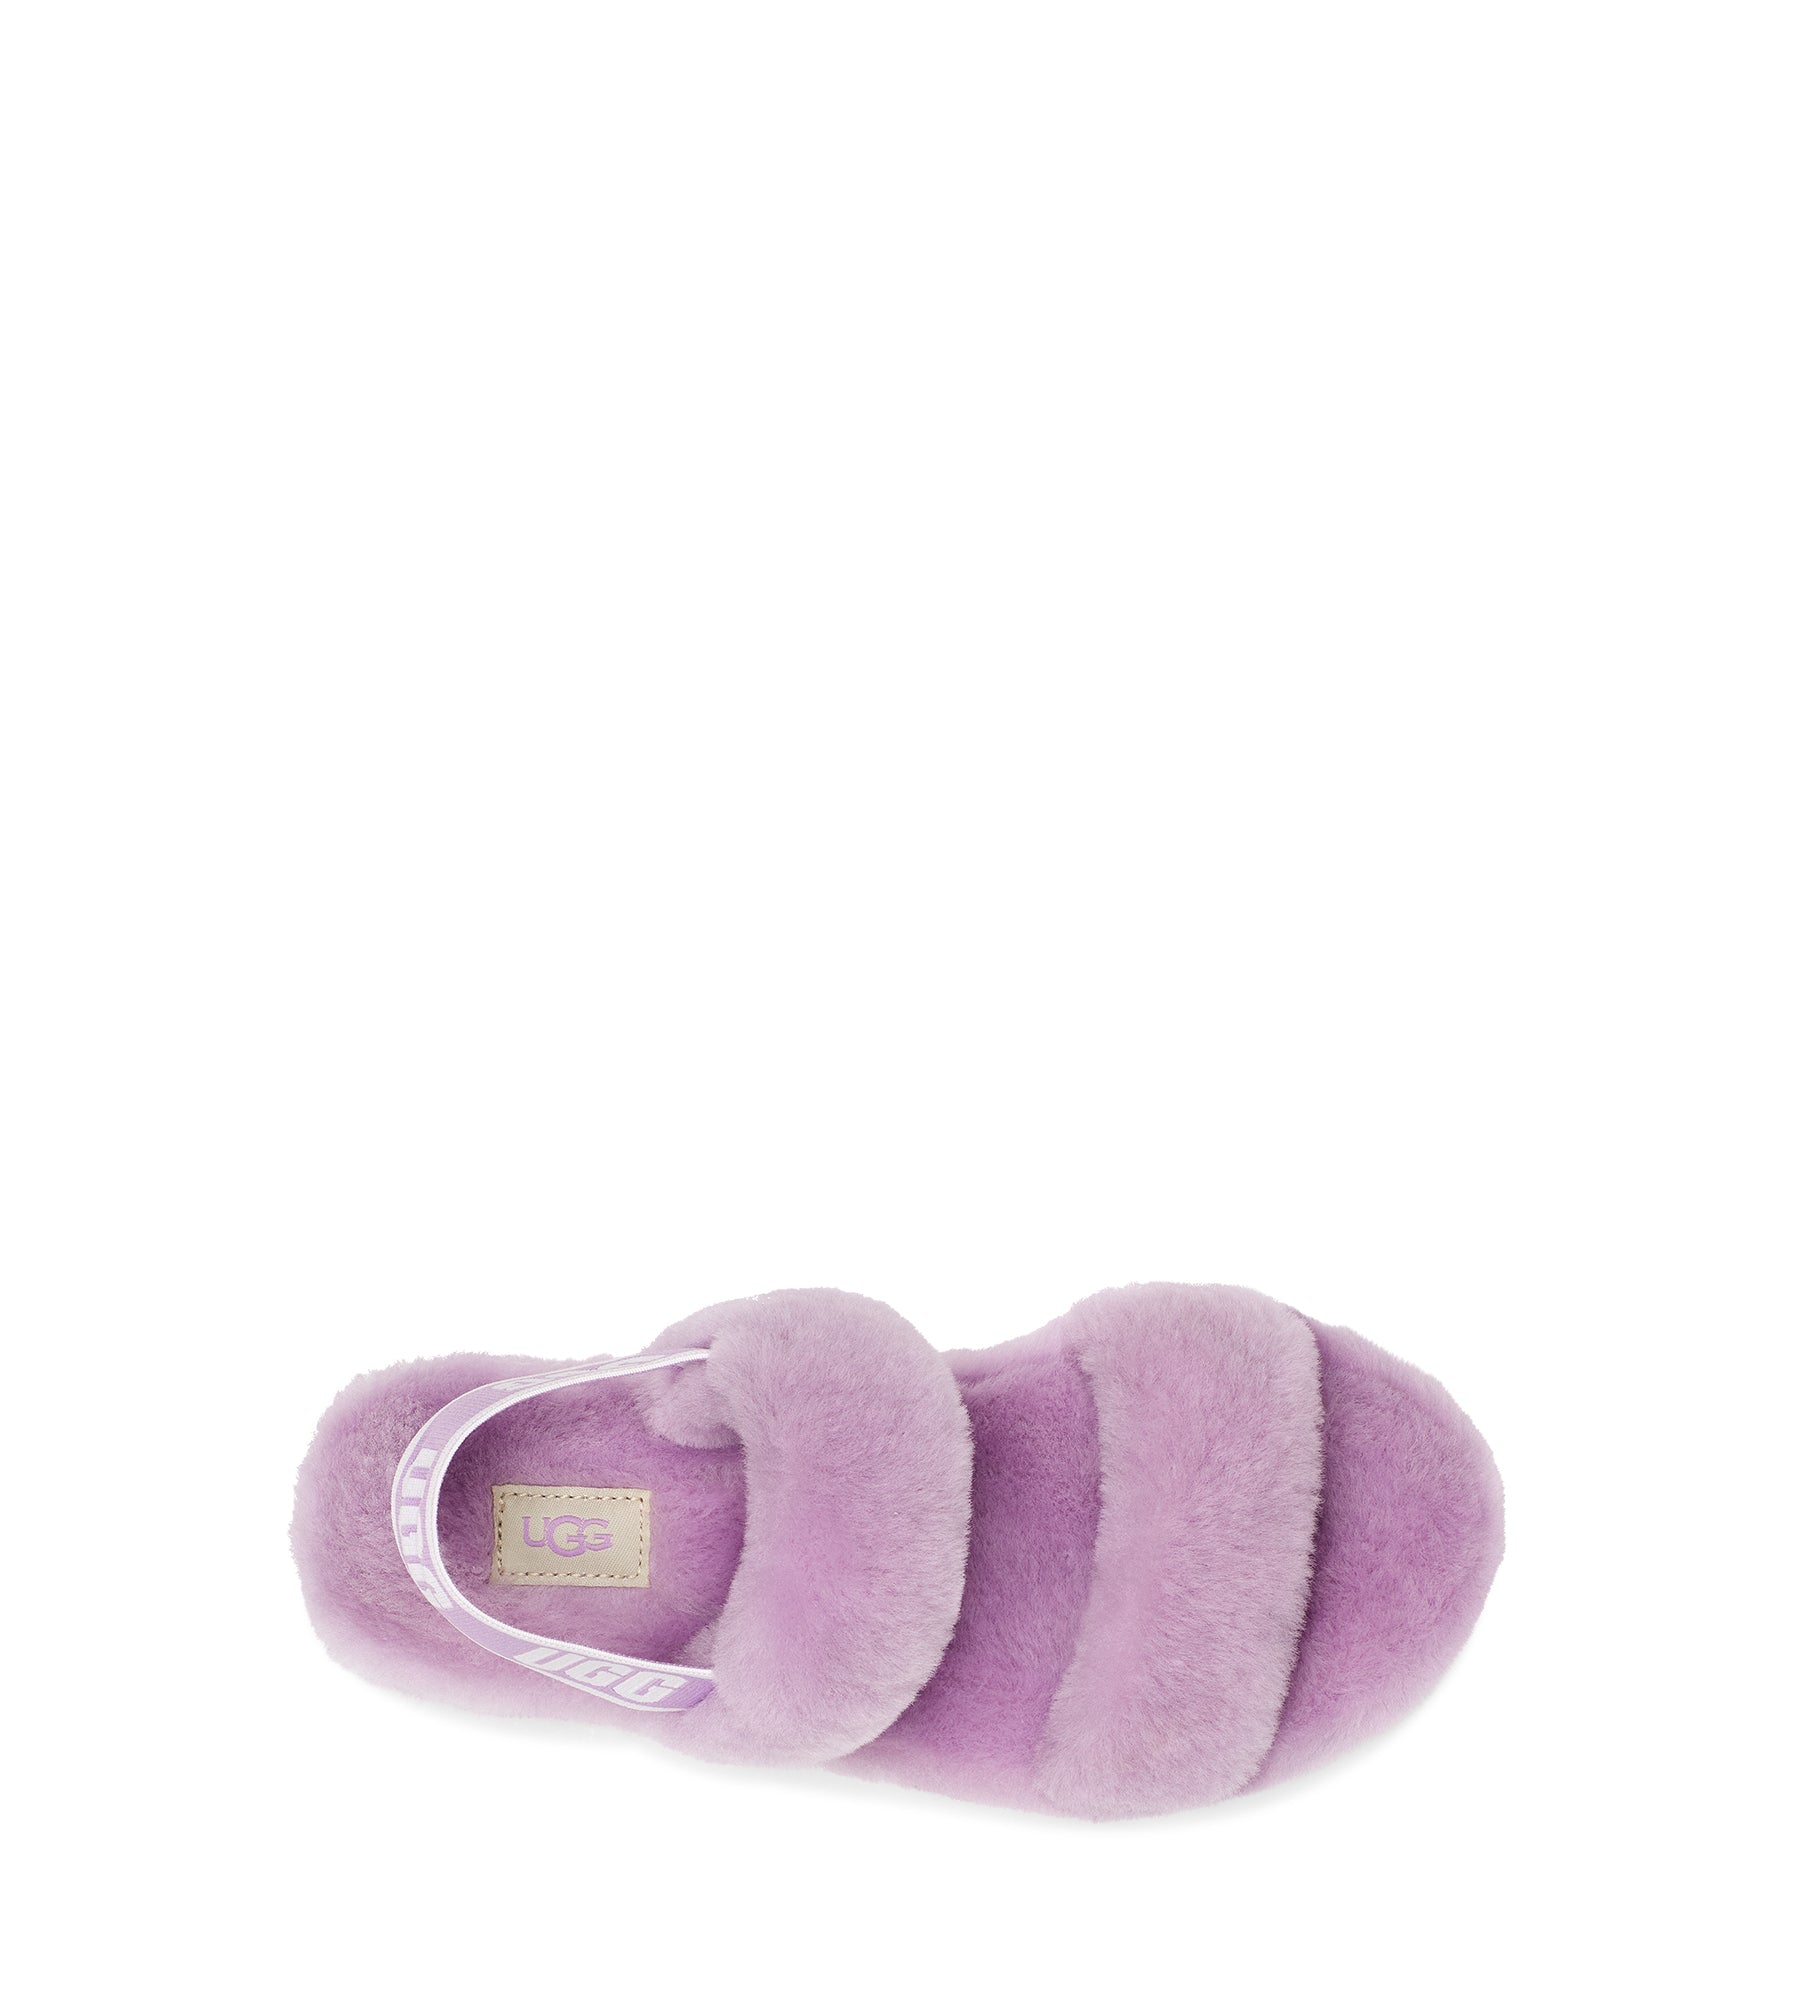 UGG Women Slides - Oh Yeah- Lilac Blossom